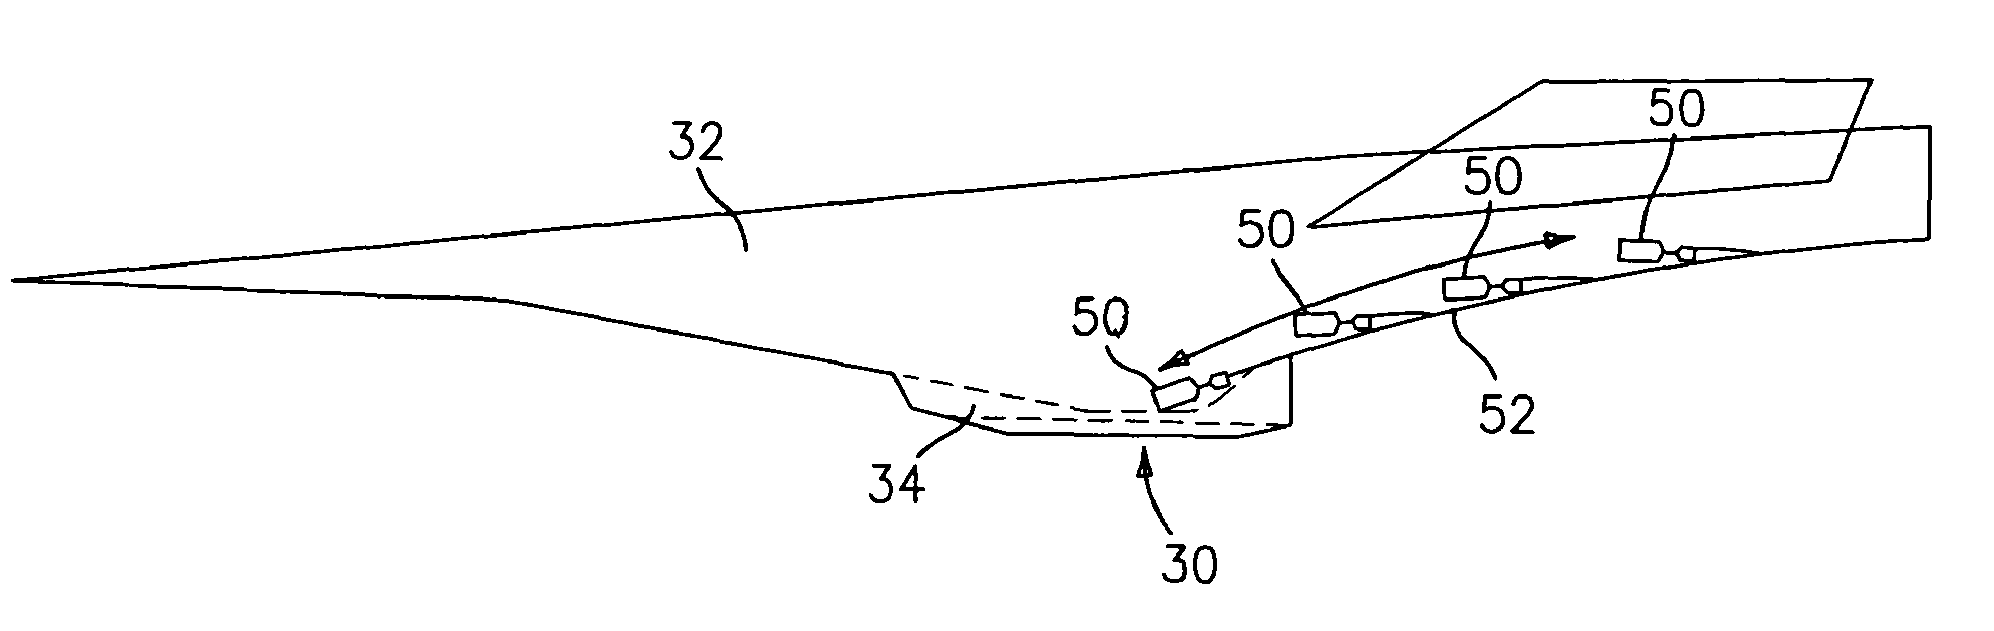 Propulsion system with integrated rocket accelerator